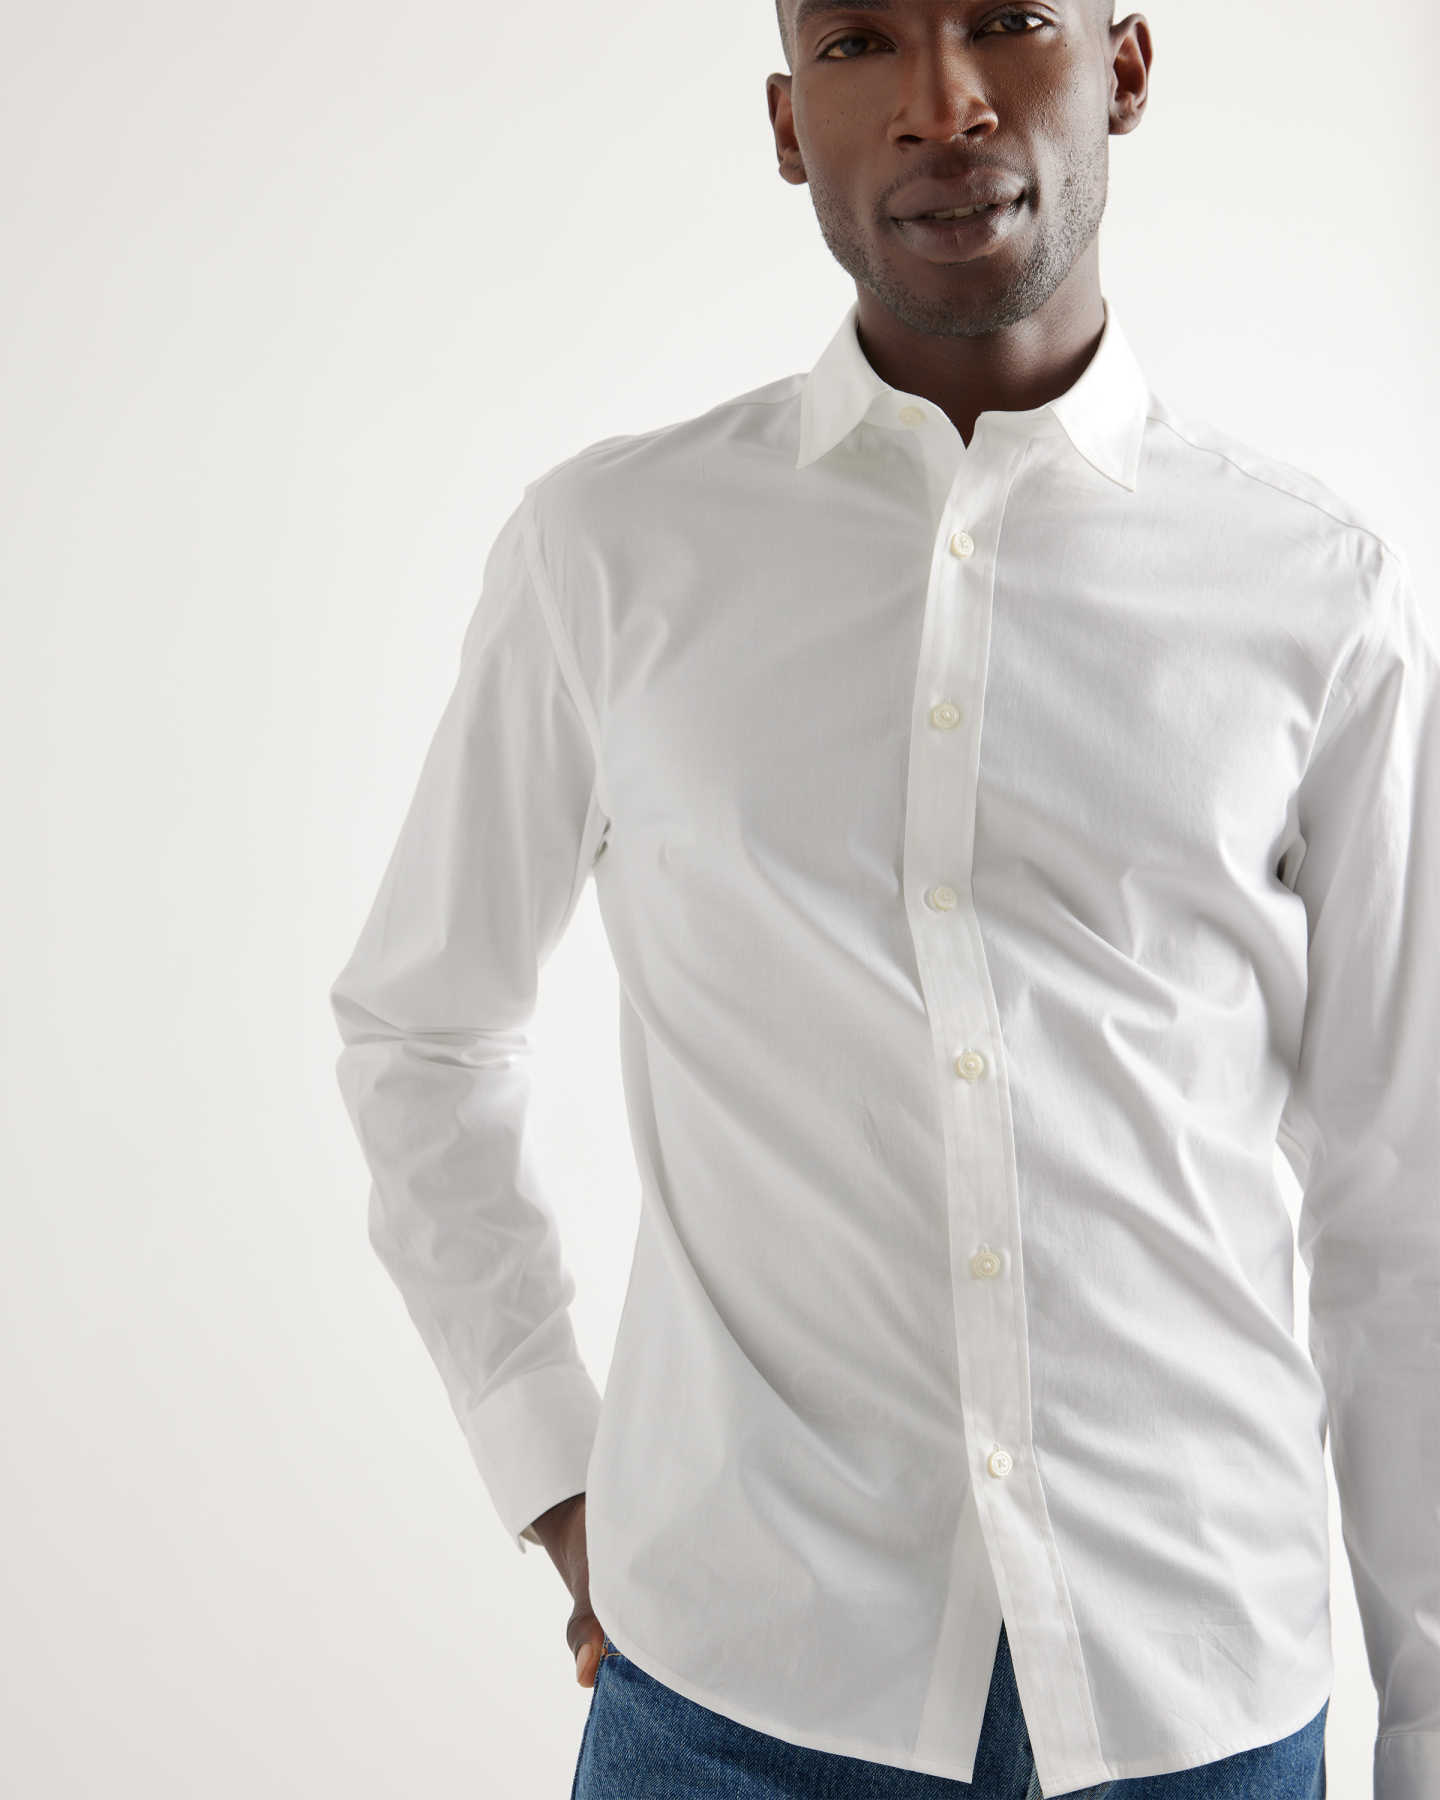 The Untucked Dress Shirt - Solid White - 2 - Thumbnail